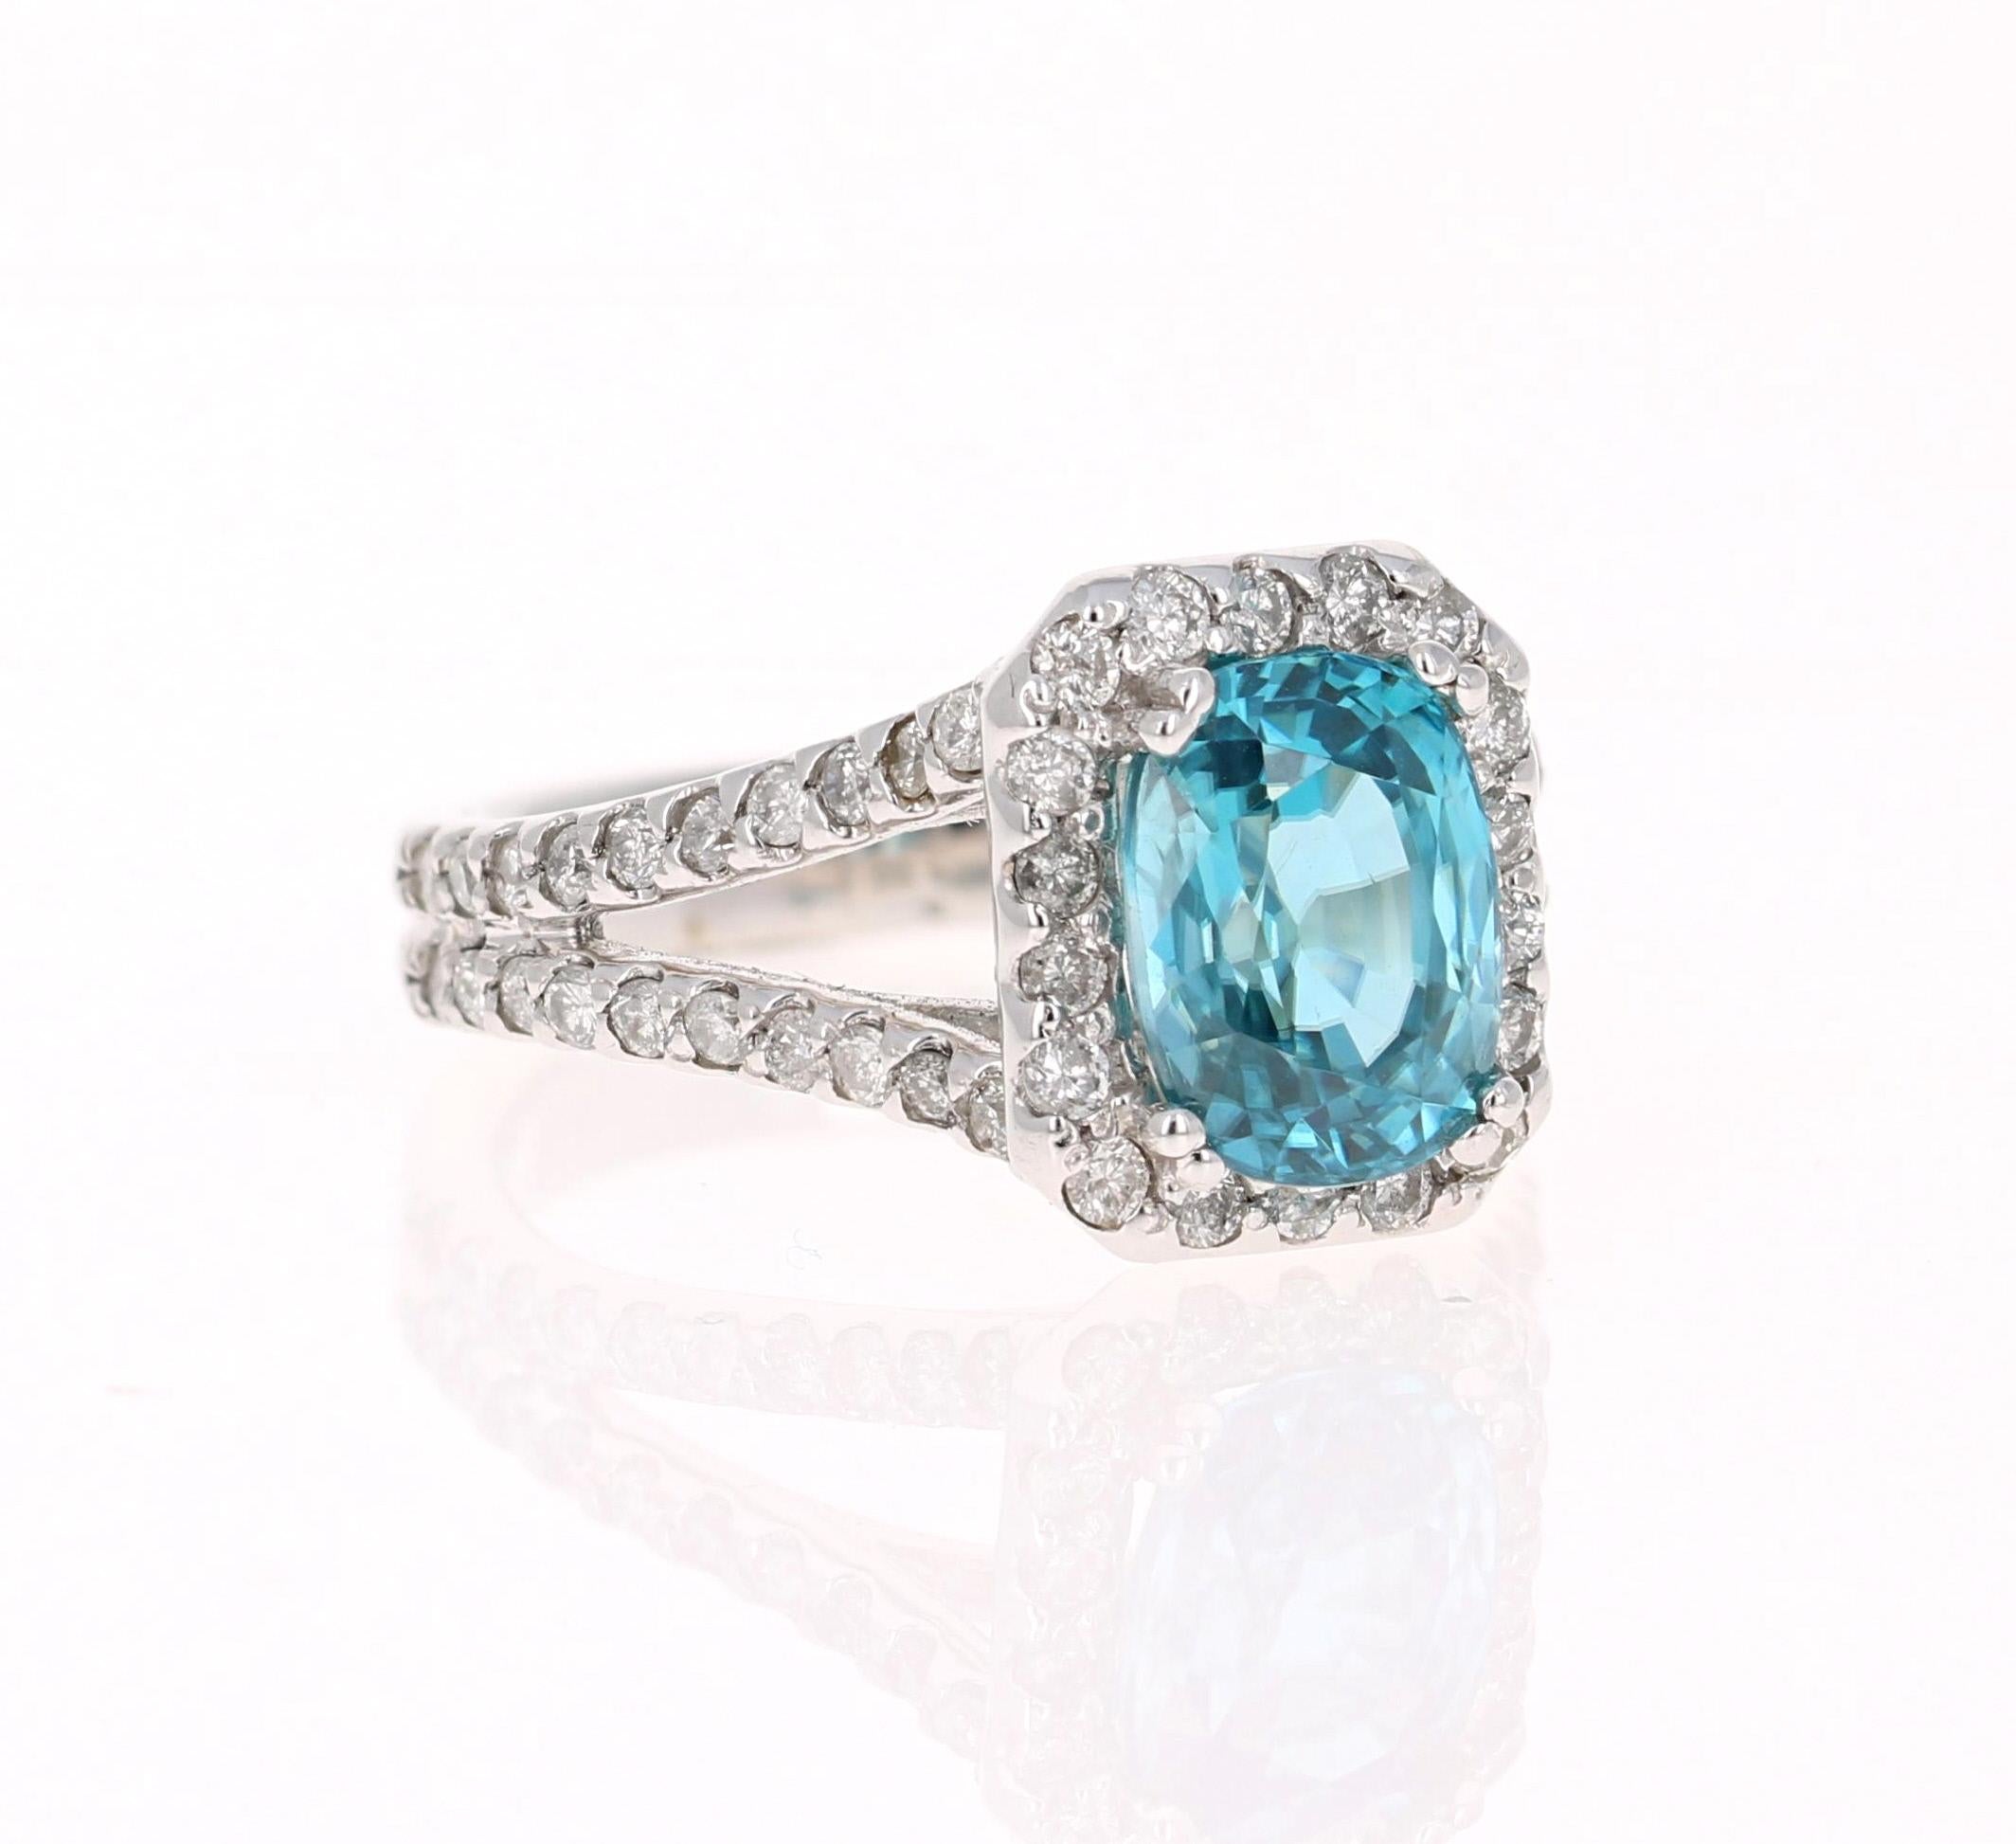 A Dazzling Blue Zircon and Diamond Ring! Blue Zircon is a natural stone mined in different parts of the world, mainly Sri Lanka, Myanmar, and Australia. 

This Blue Zircon is 4.00 Carats and is surrounded by a halo and split shank of 58 Round Cut